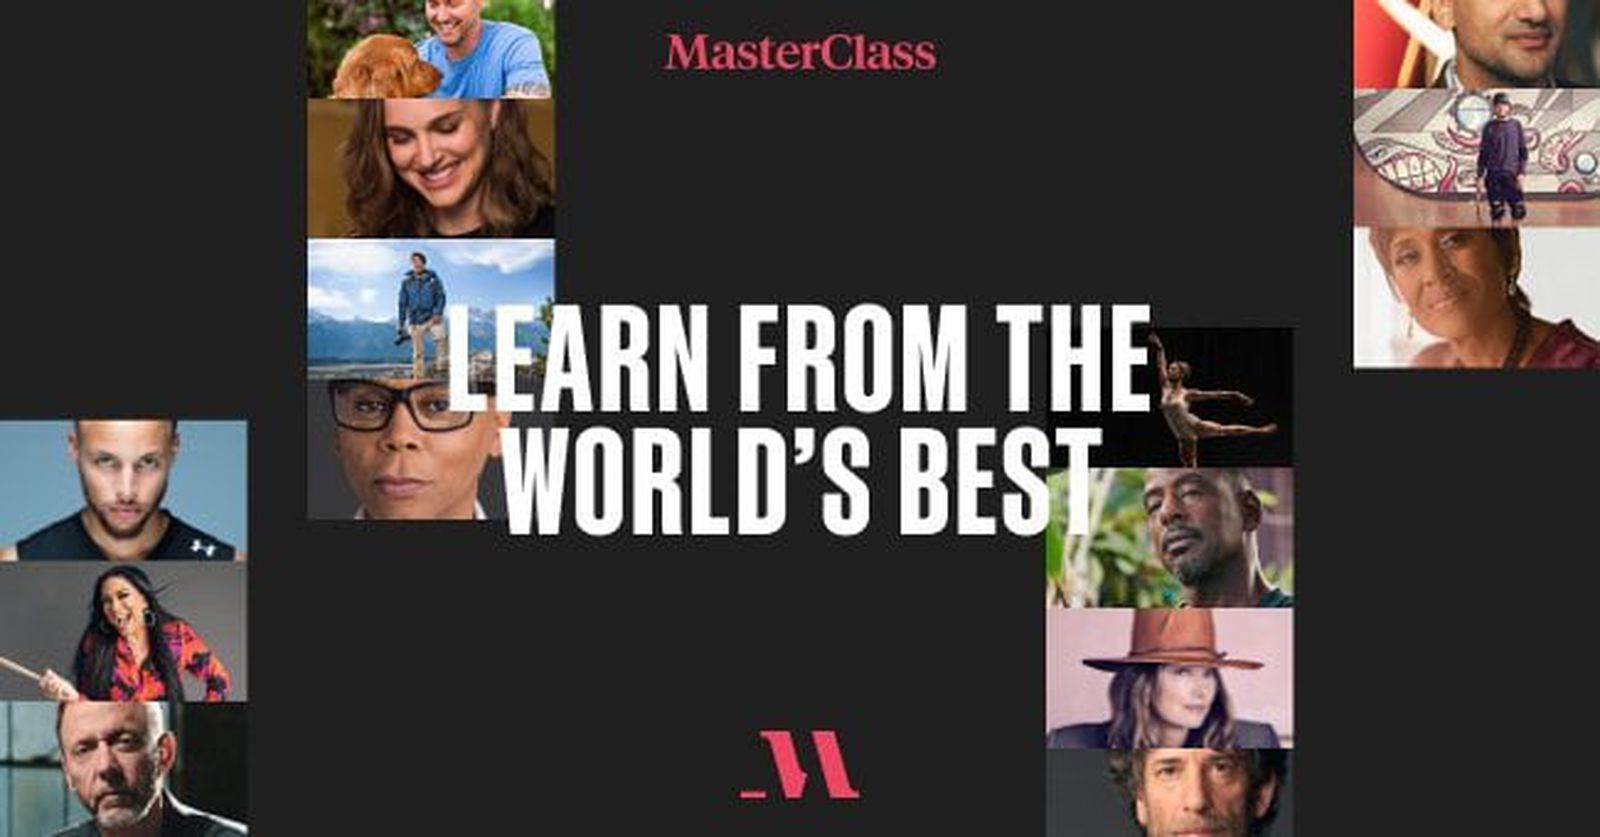 MasterClass Adds Support for Apple's FaceTime SharePlay Feature